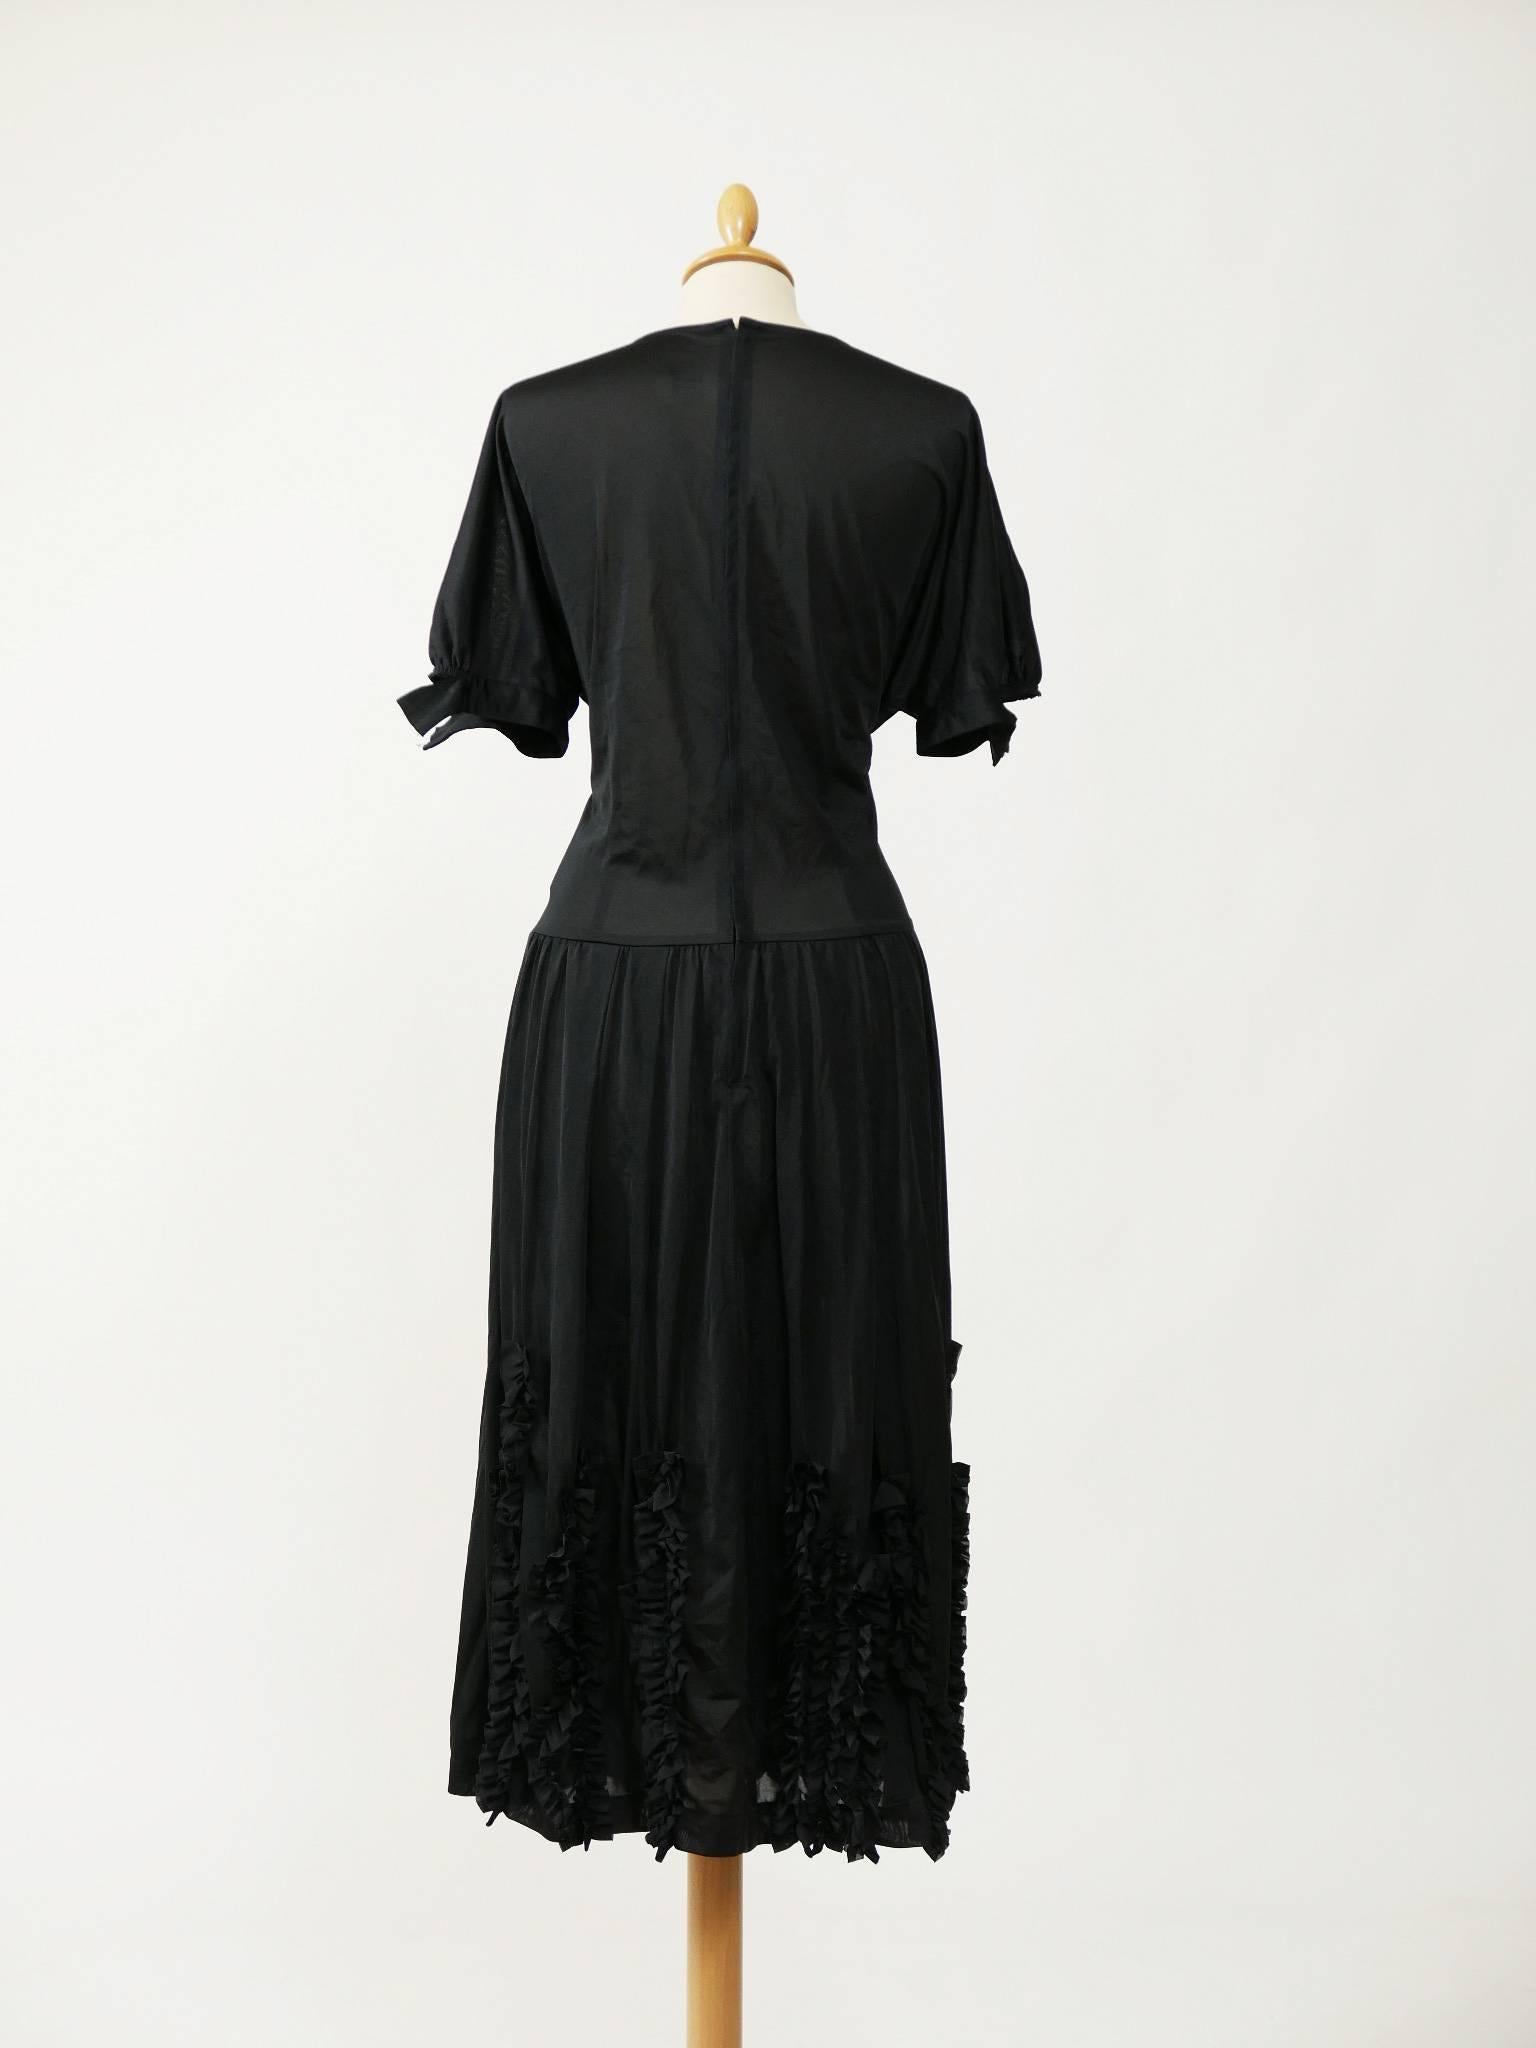 COMME des GARCONS Black Ruffle Dress In Excellent Condition In Milan, Italy